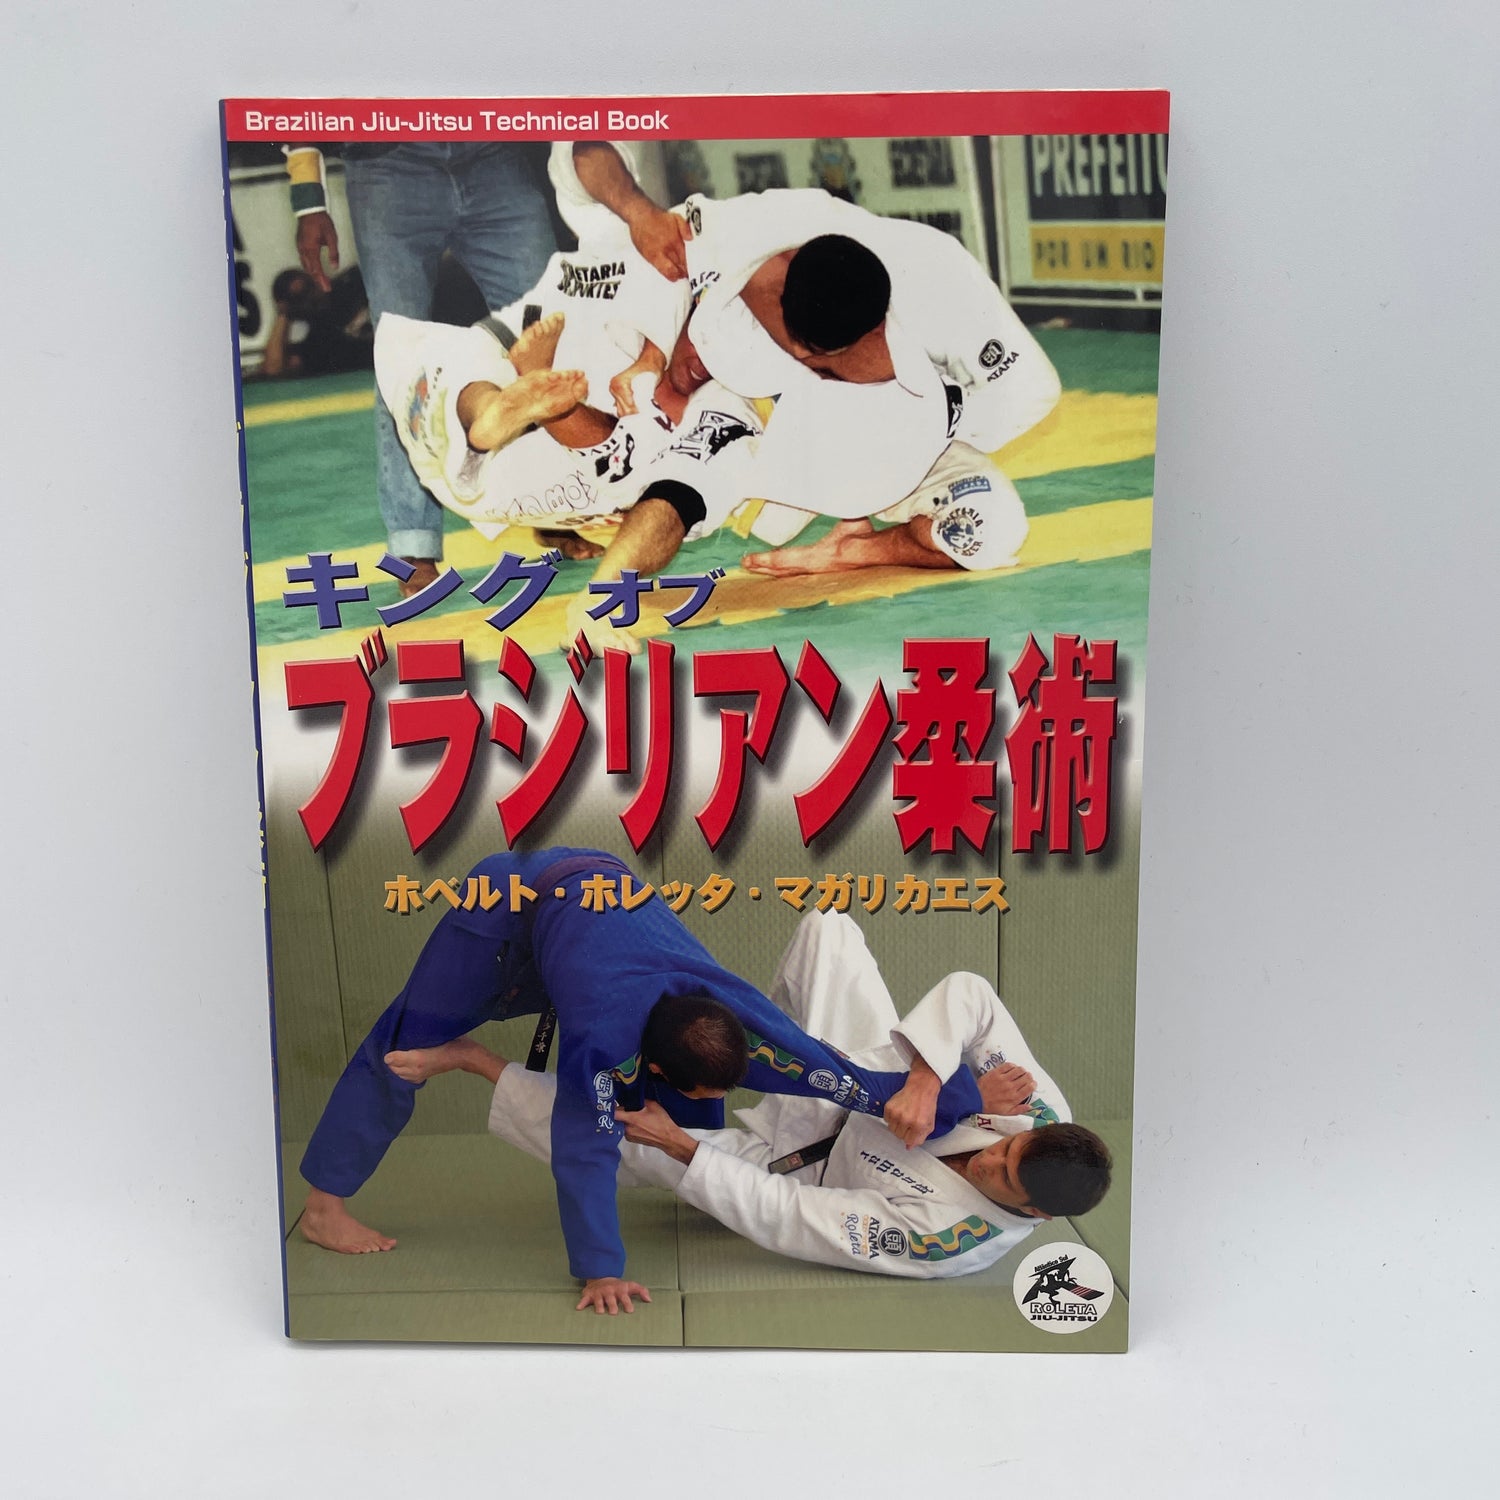 King of BJJ Book By Roberto Roleta Magalhaes (Preowned)